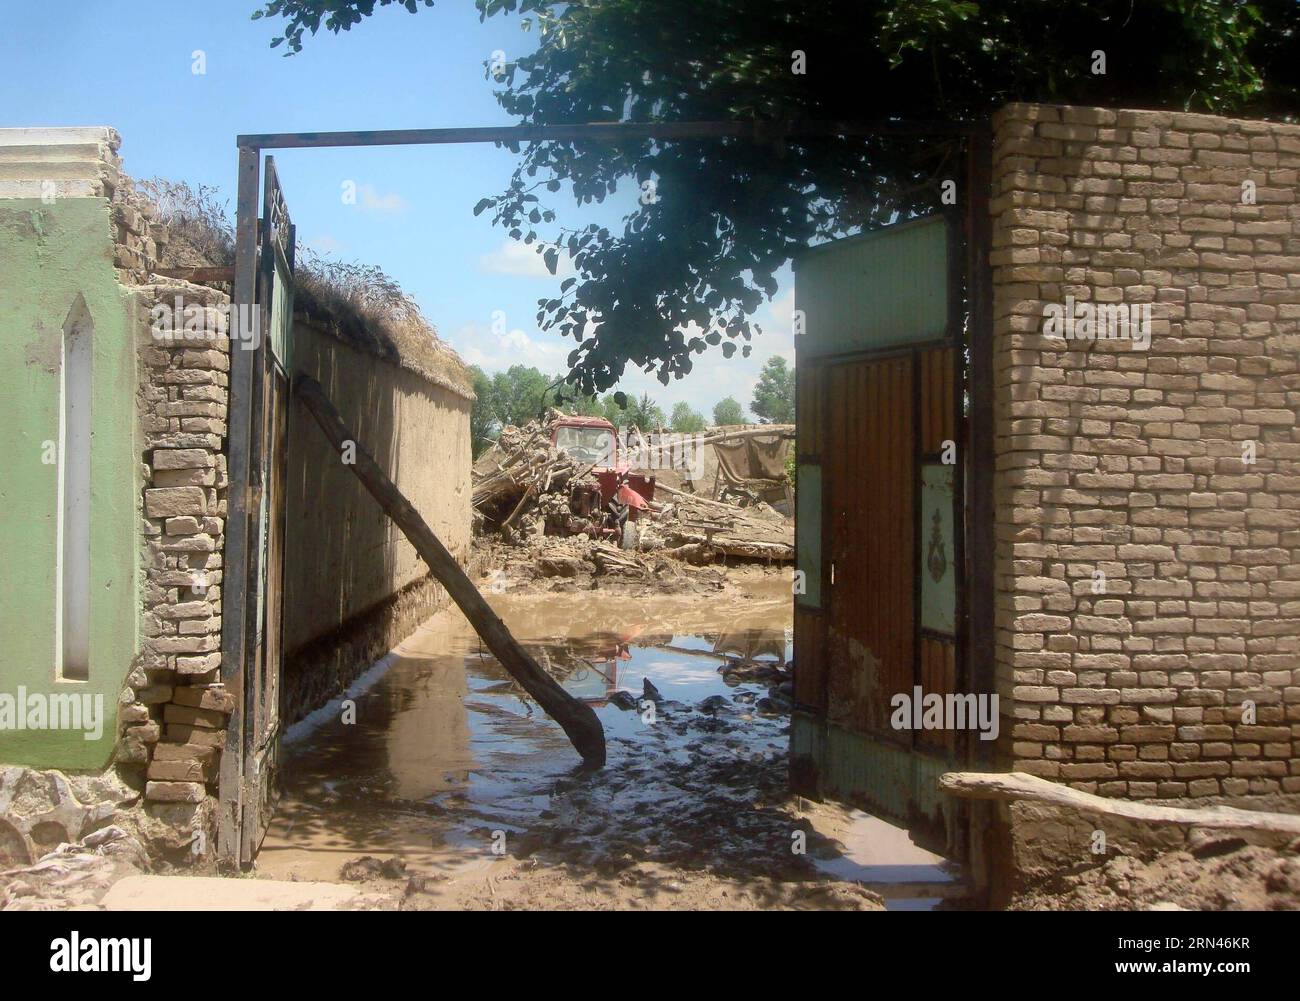 (150509) -- BAGHLAN, May 9, 2015 -- Photo taken on May 9, 2015 shows destroyed houses after a heavy rain in Baghlan province, north Afghanistan. One person has been confirmed dead and 10 others injured as flood washed away more than 500 houses in Baghlan-e-Markazi district of the northern Baghlan province early Saturday, district governor Gohar Khan Babri said. )(zhf) AFGHANISTAN-BAGHLAN-FLOOD Sahil PUBLICATIONxNOTxINxCHN   Baghlan May 9 2015 Photo Taken ON May 9 2015 Shows destroyed Houses After a Heavy Rain in Baghlan Province North Afghanistan One Person has been confirmed Dead and 10 Other Stock Photo